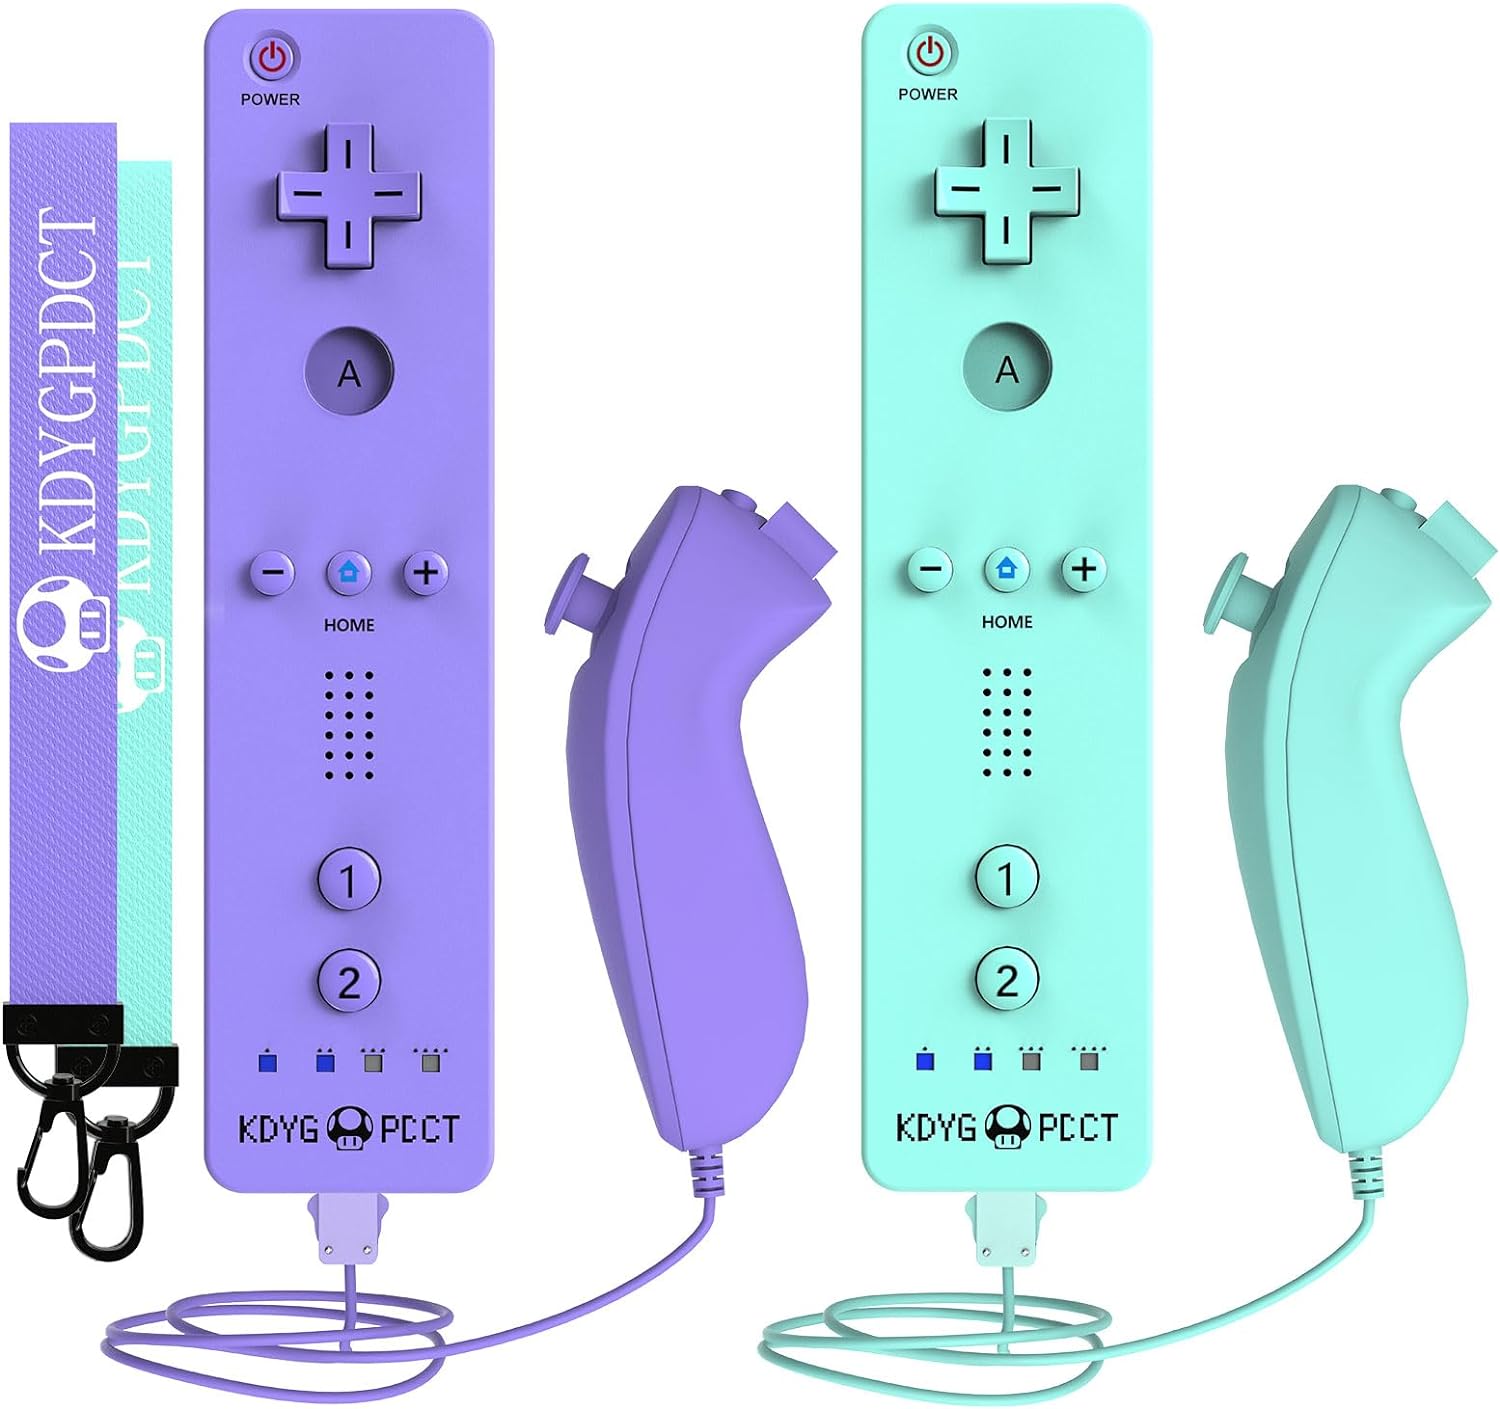 KDYGPDCT 2 Pack Wii Remote with Nunchuck,Wii Controller with 2 Nunchucks Compatible with Nintendo Wii/Wii U (Blue + Purple)